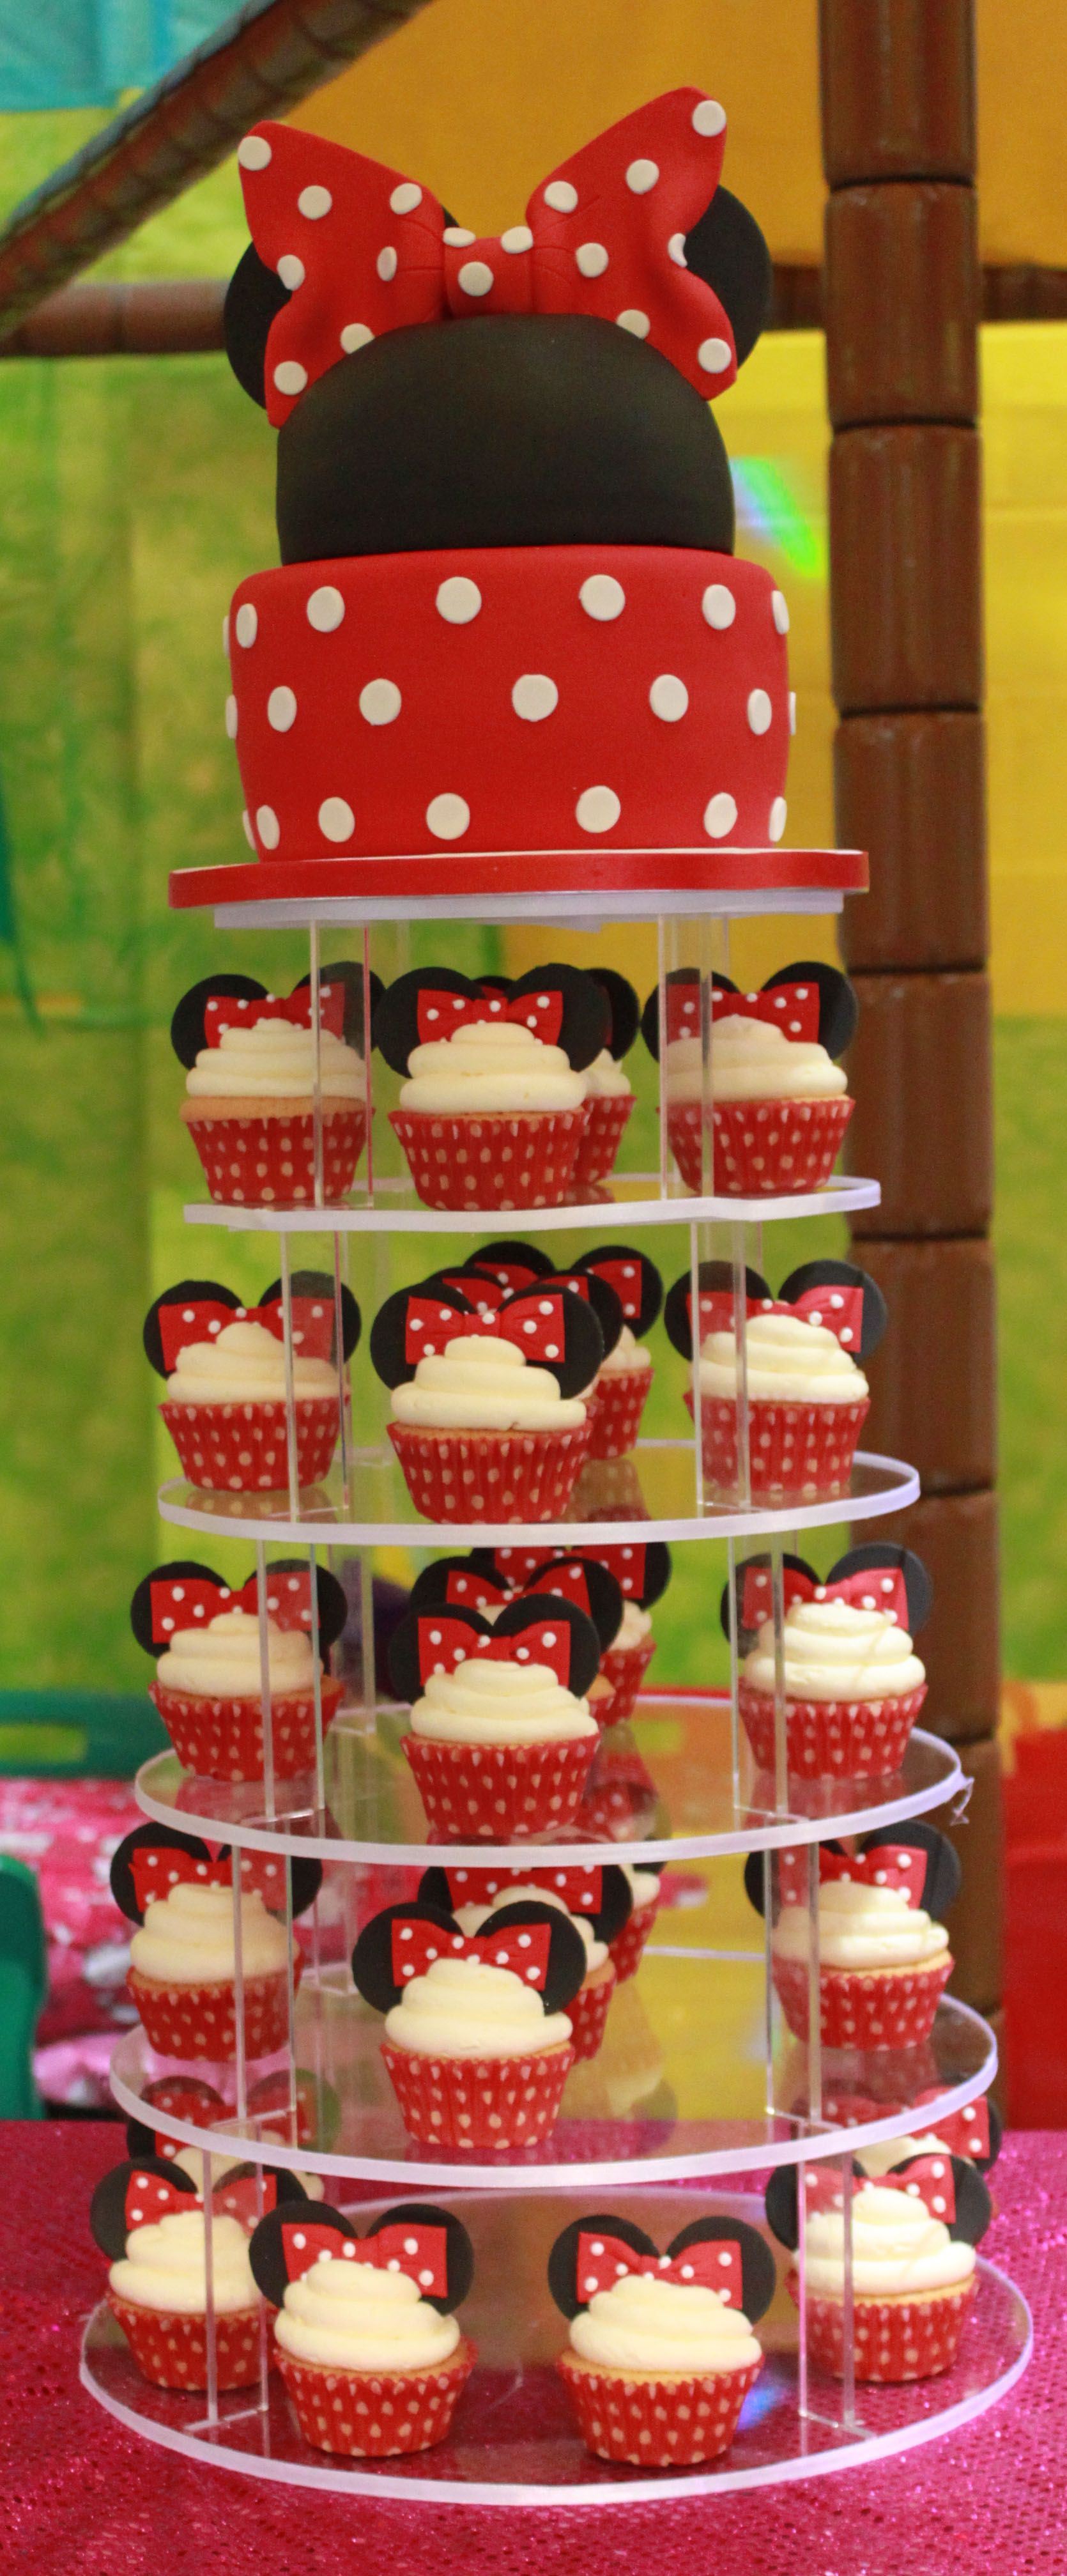 Minnie Mouse Cake And Cupcakes BirtHDay